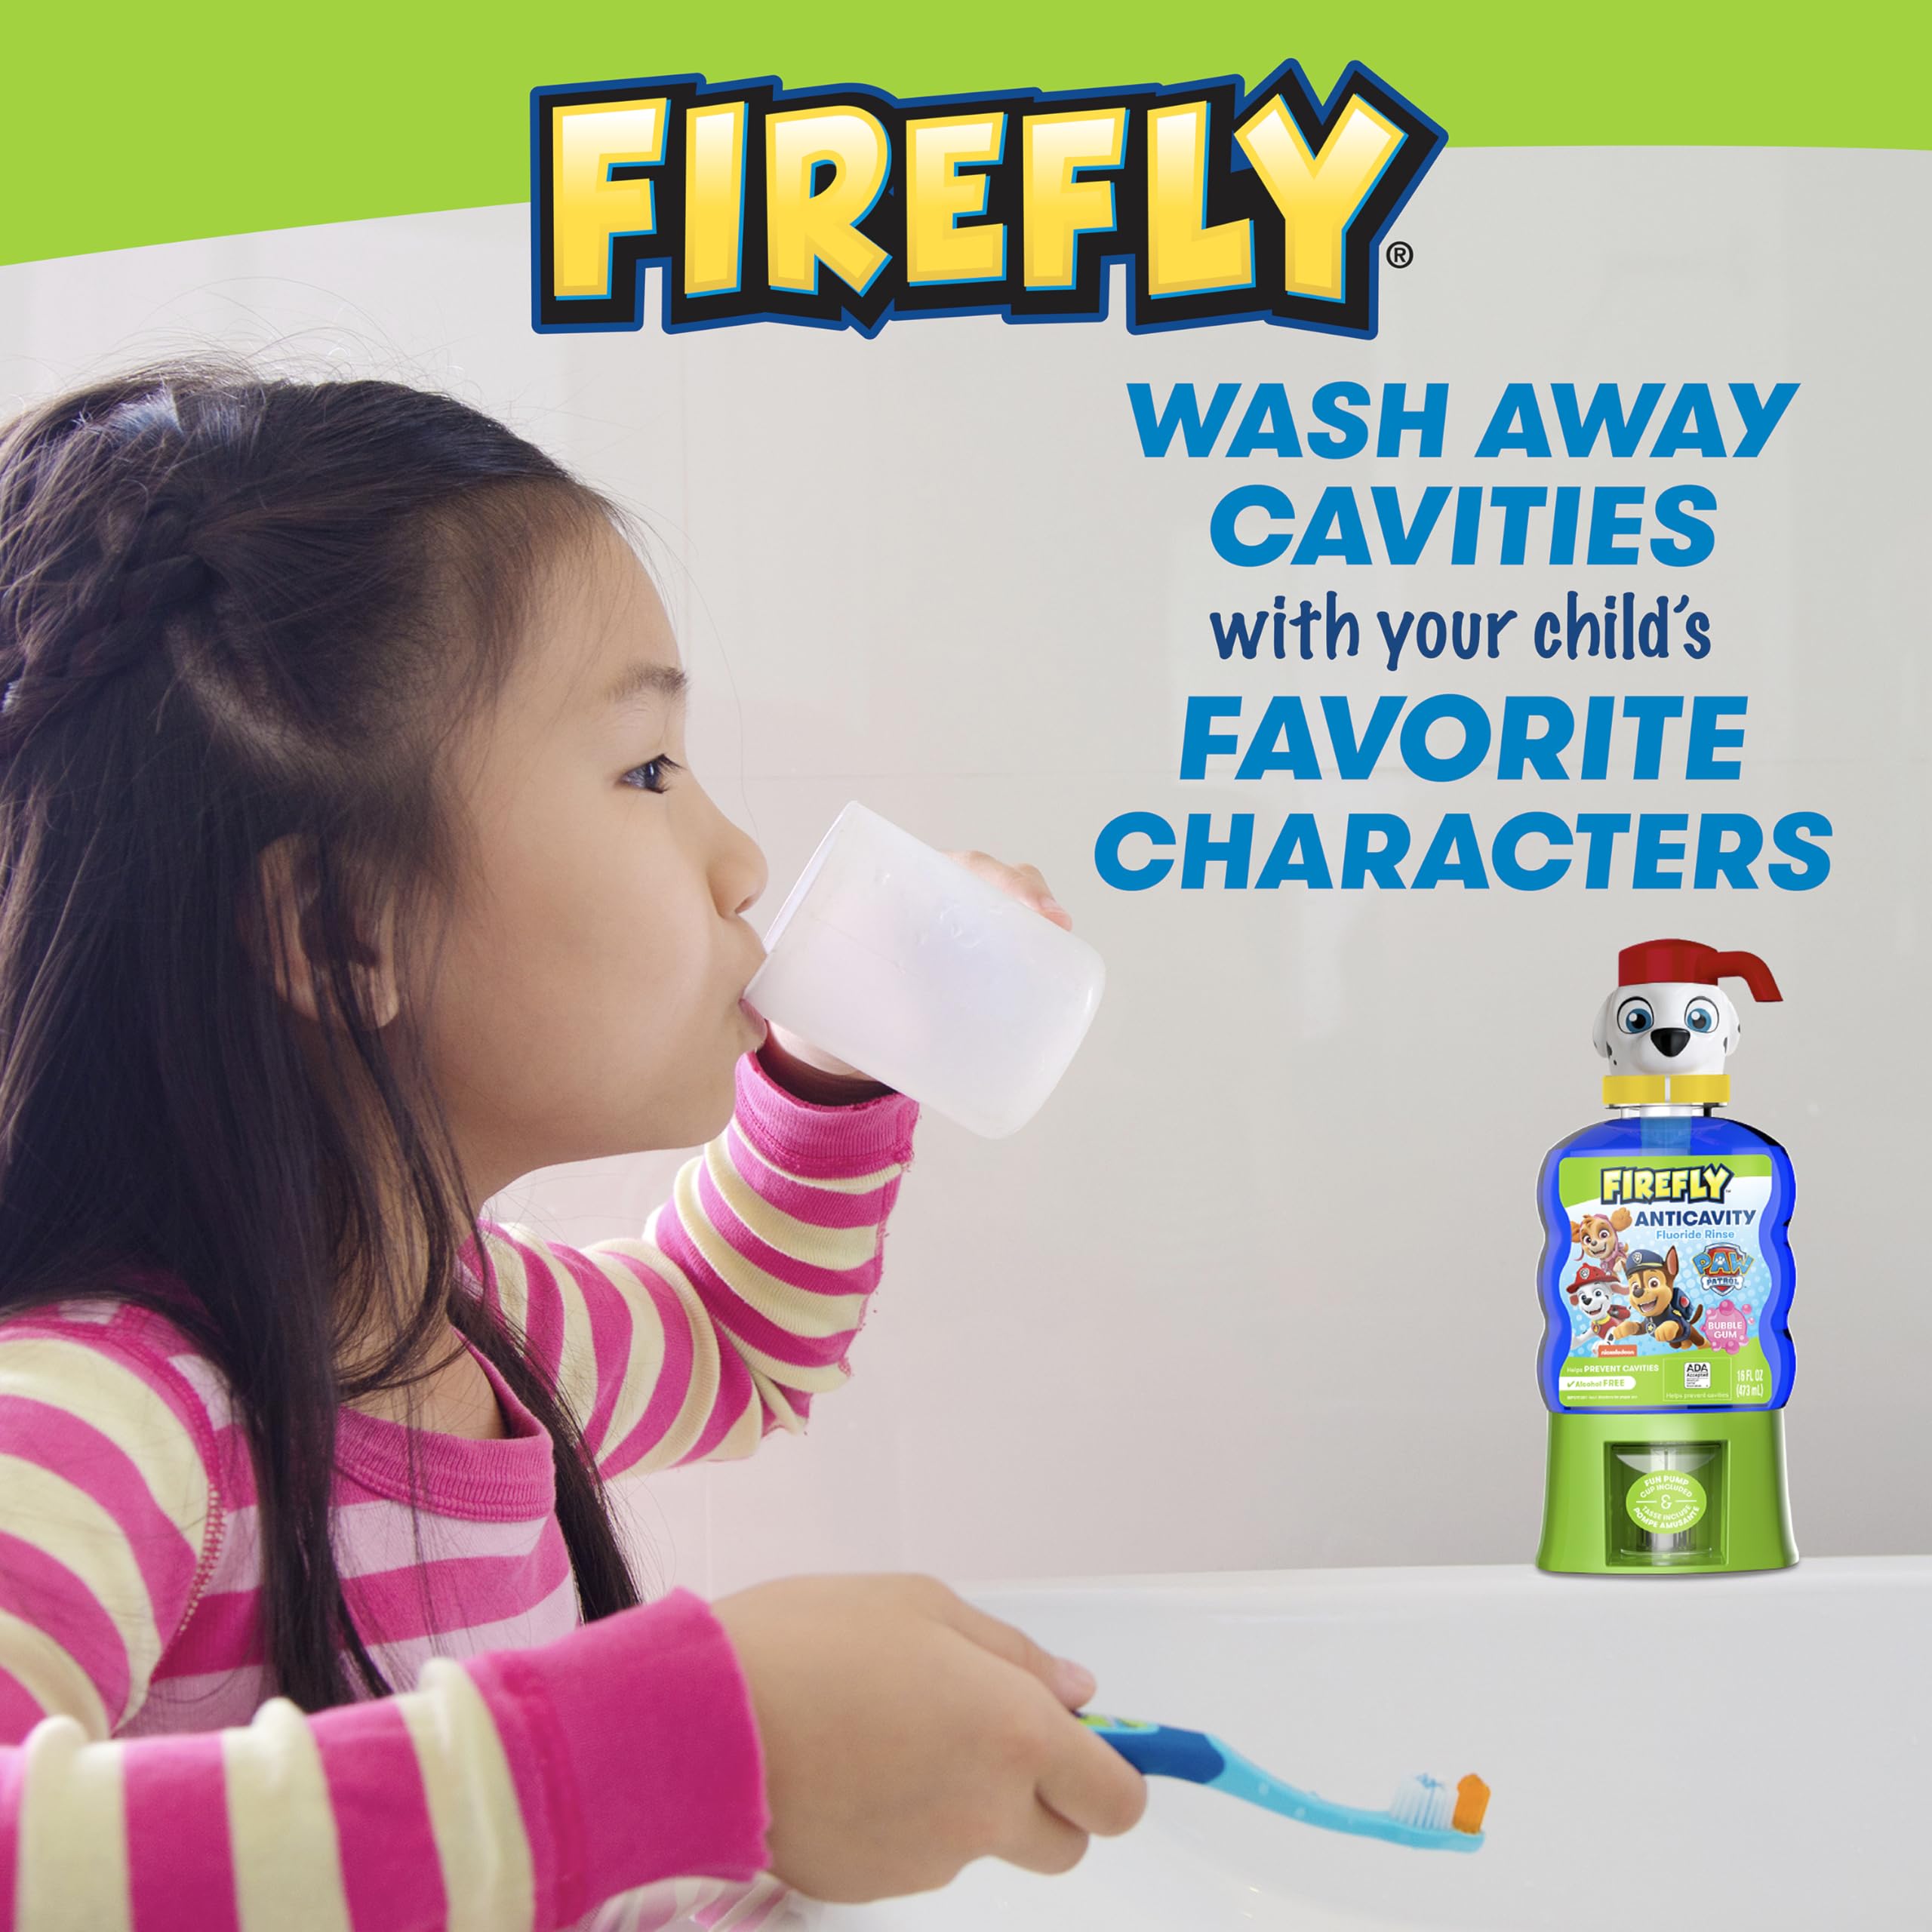 Firefly Kids Anti-Cavity Fluoride Rinse, Paw Patrol, Alcohol Free Formula, ADA Accepted, Helps Prevent Cavities, Bubble Gum Flavor, 16 Ounce